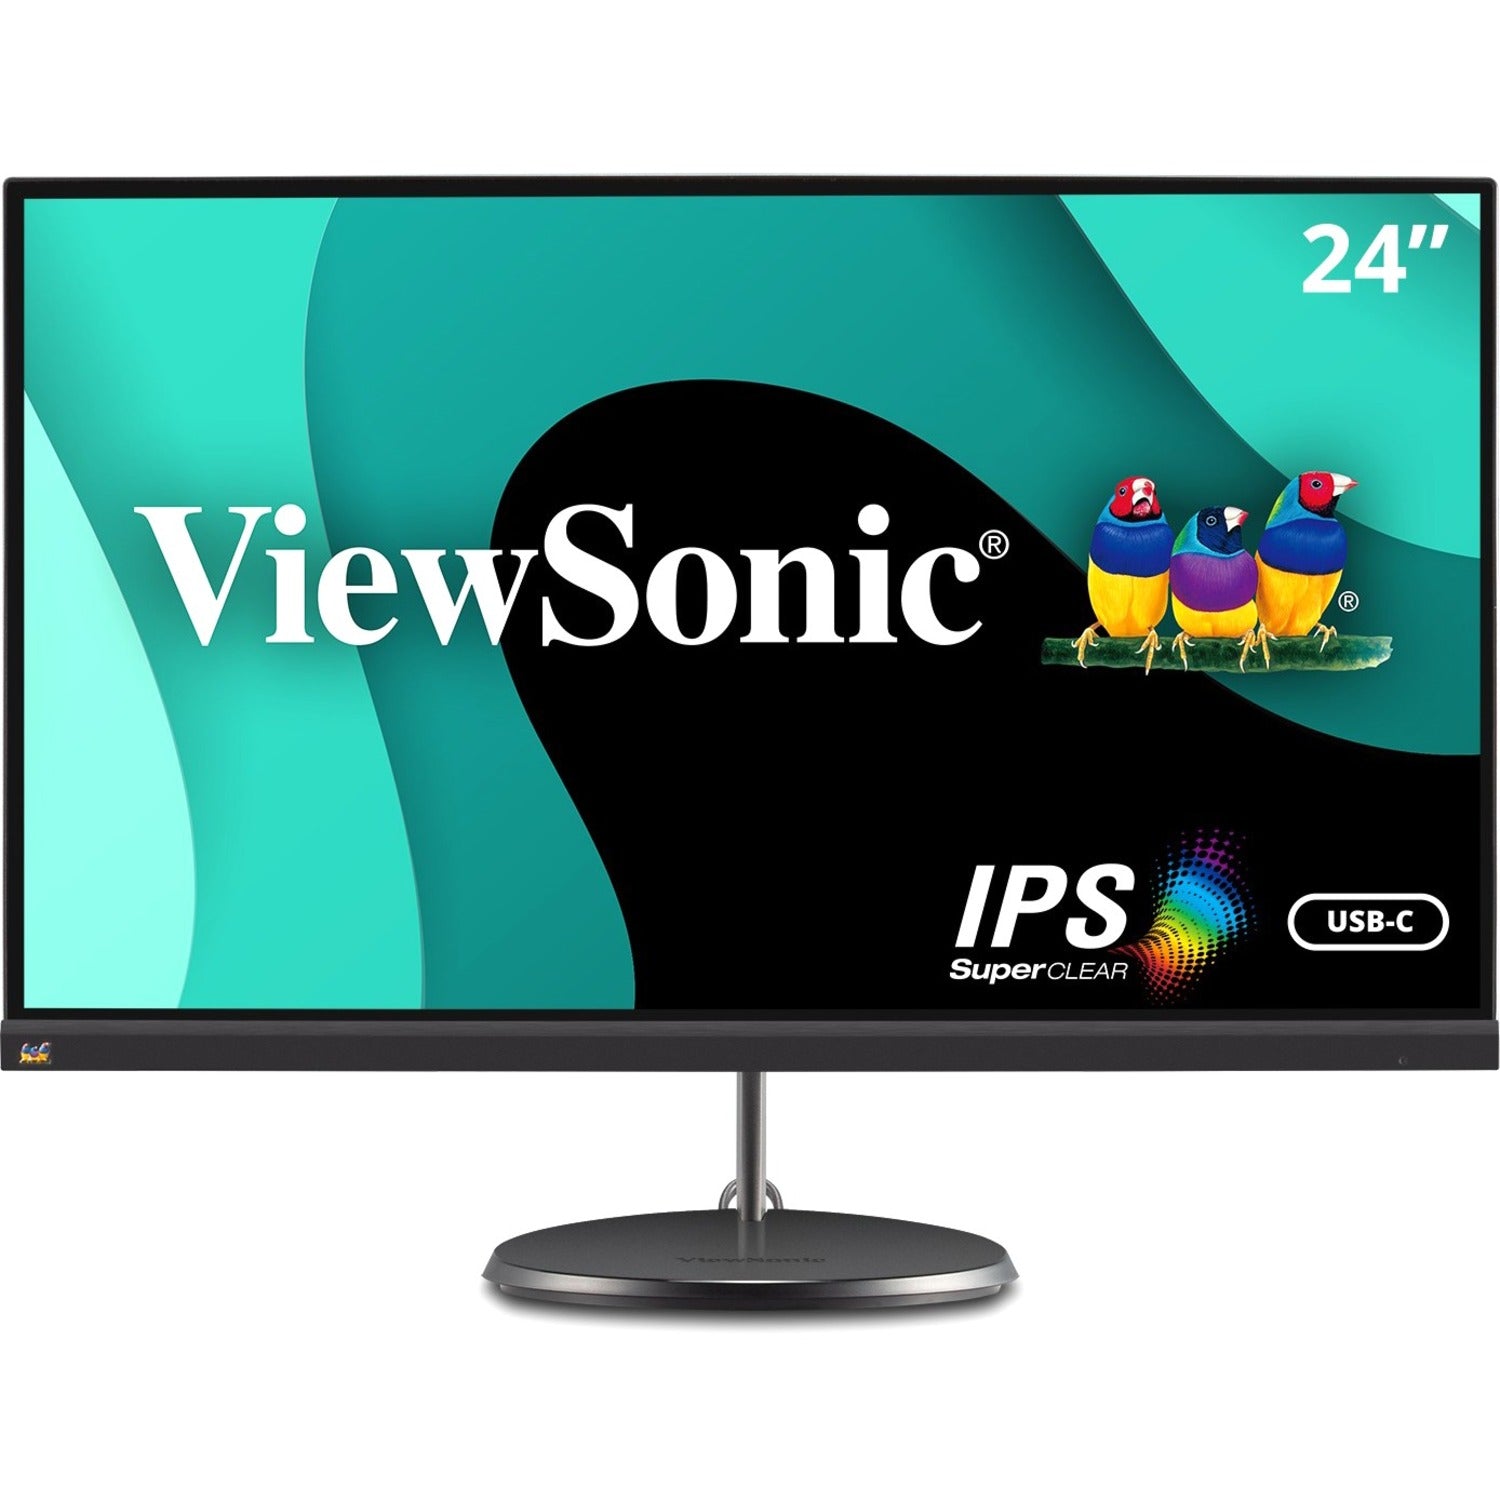 ViewSonic VX2485-MHU 24 Inch 1080p IPS Monitor with USB C 3.2 and FreeSync for Home and Office - VX2485-MHU